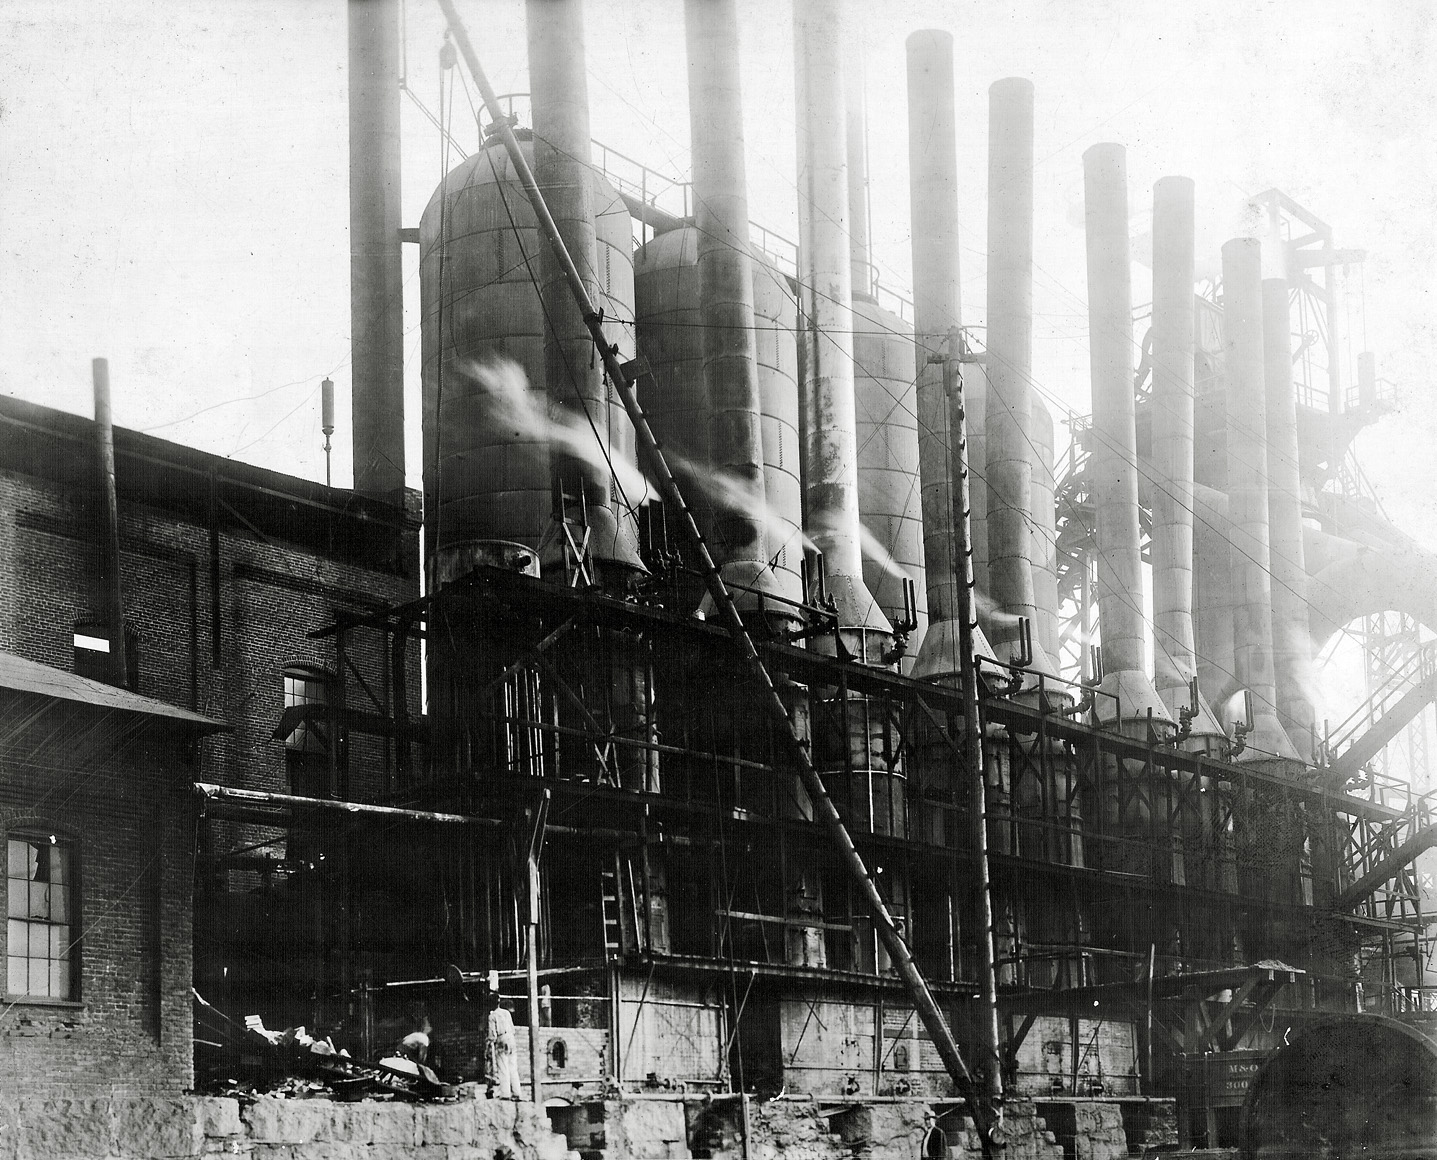 I purchased this framed photo at an estate sale in Birmingham. This image looks like it may be Sloss Furnace, now a Birmingham historic site, at the turn of the century. View full size.